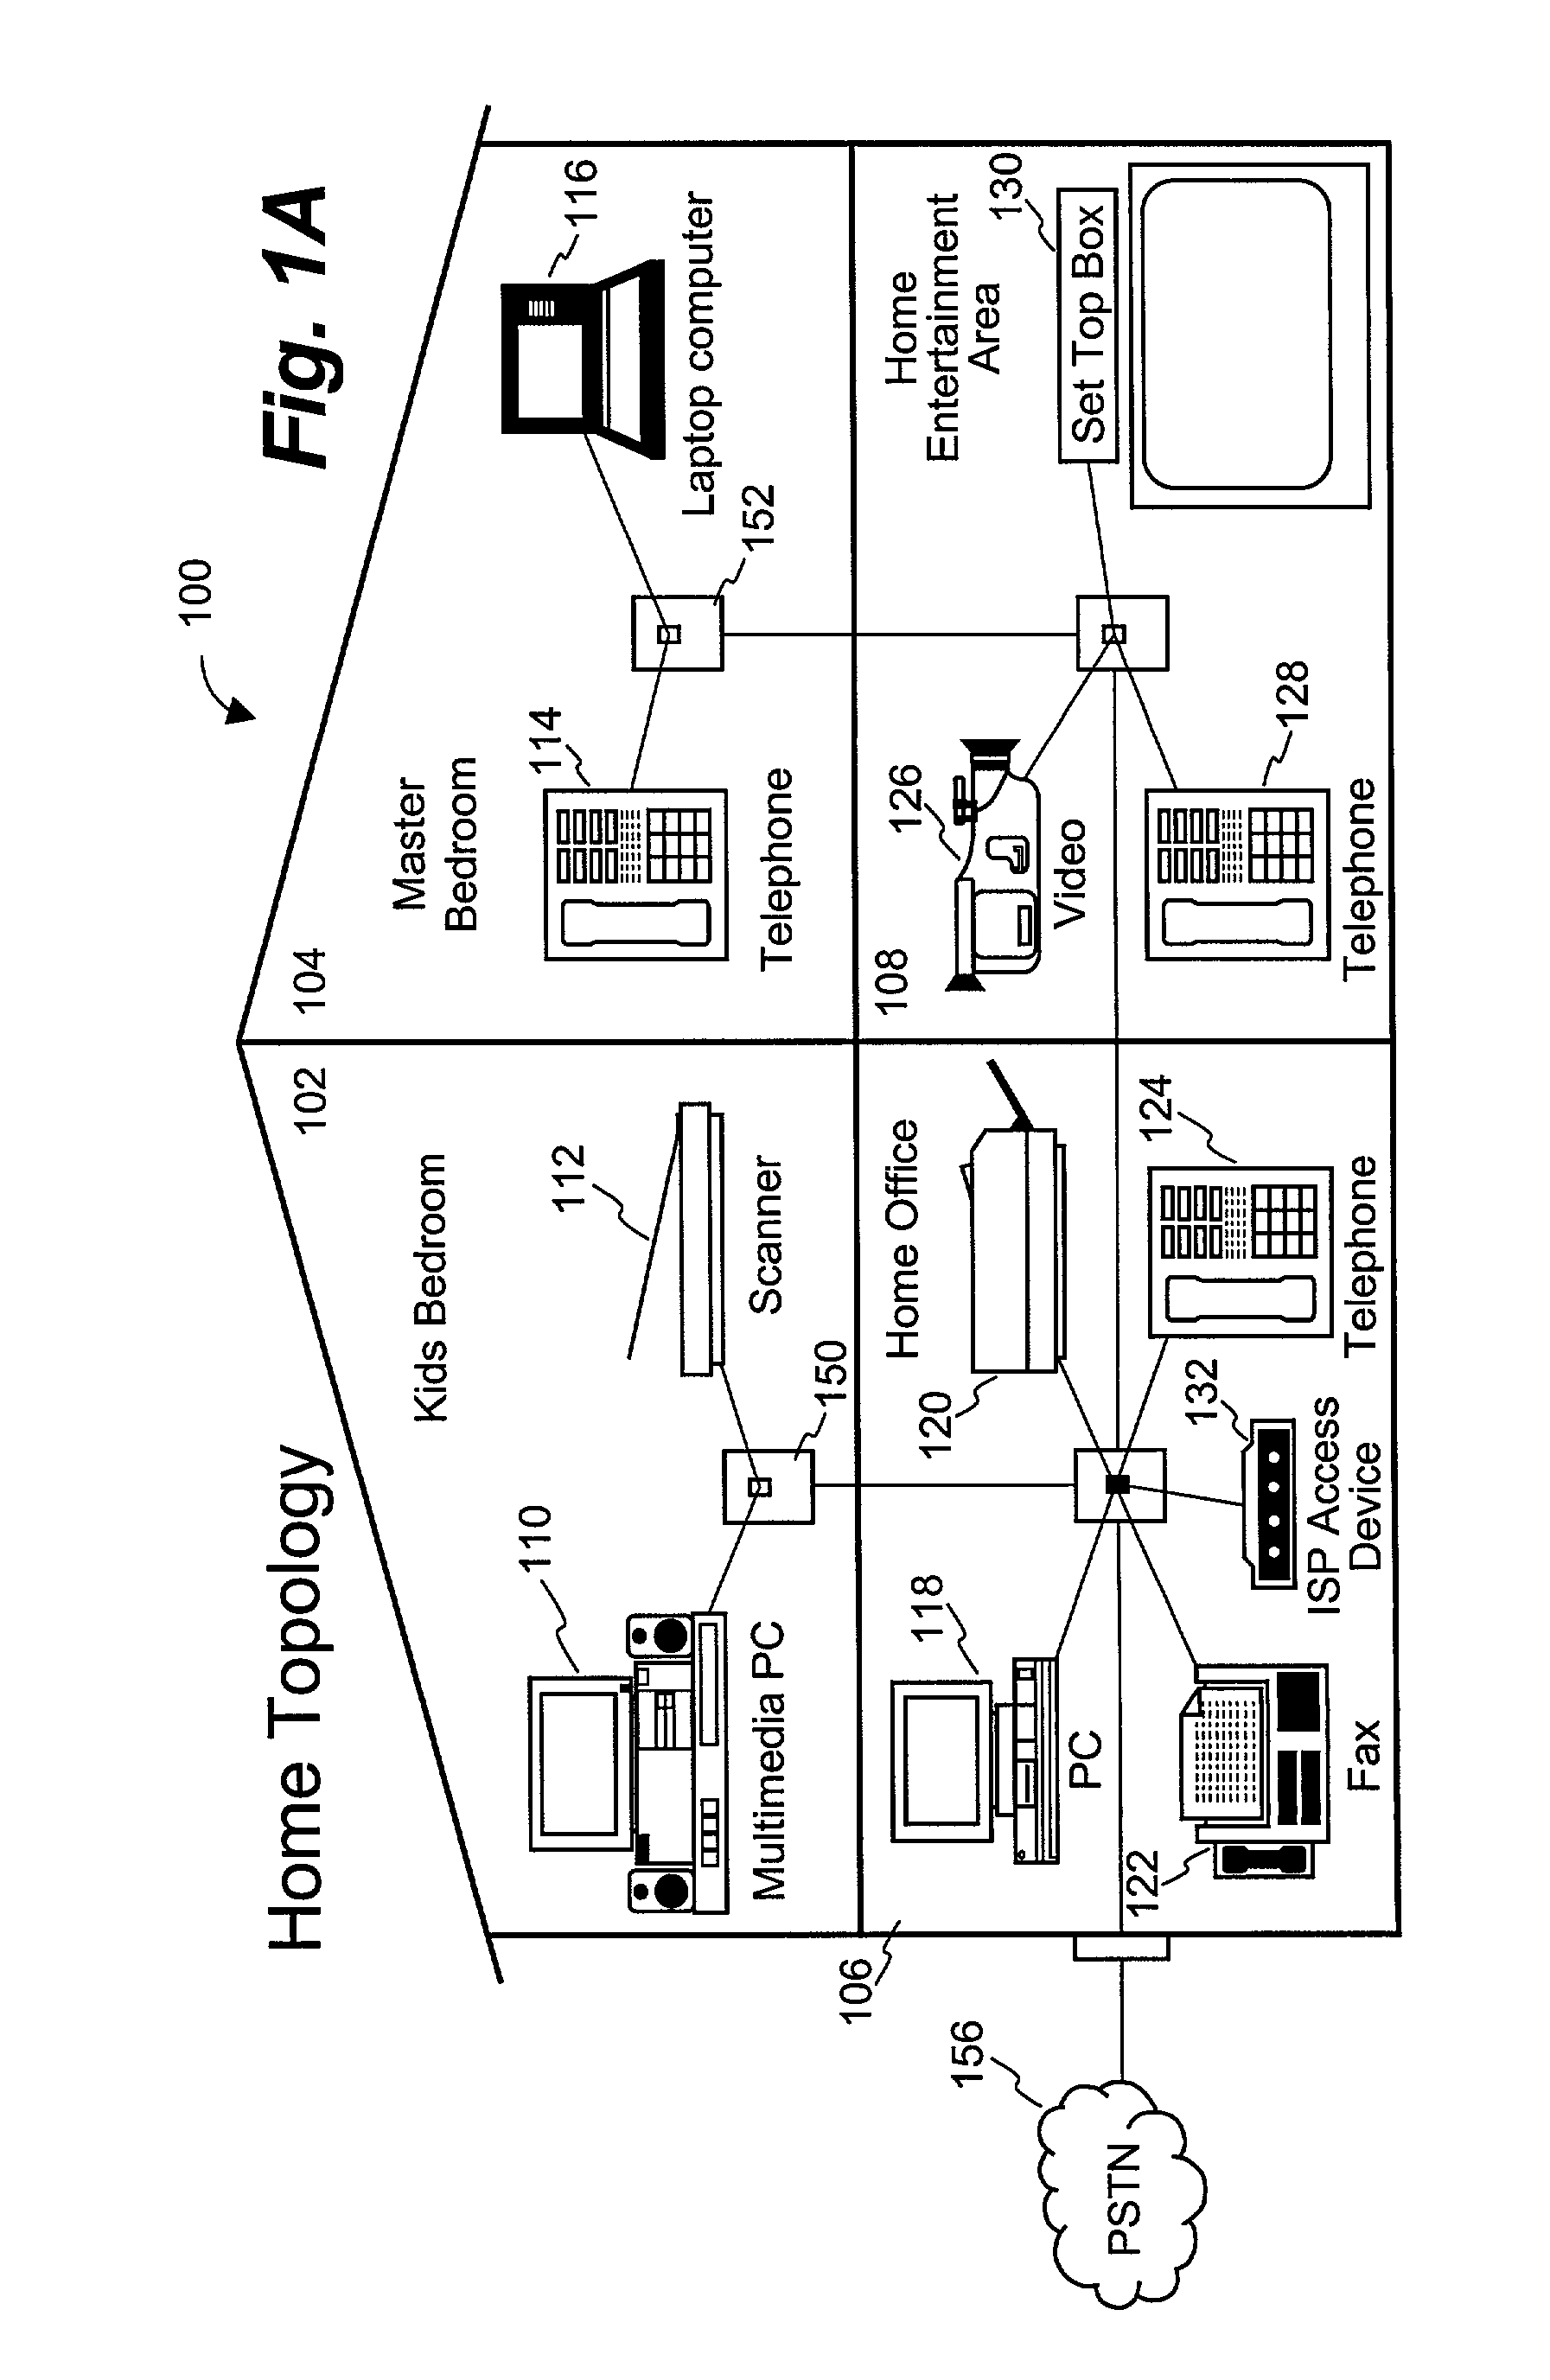 Method and apparatus for dynamically adjusting receiver sensitivity over a phone line home network